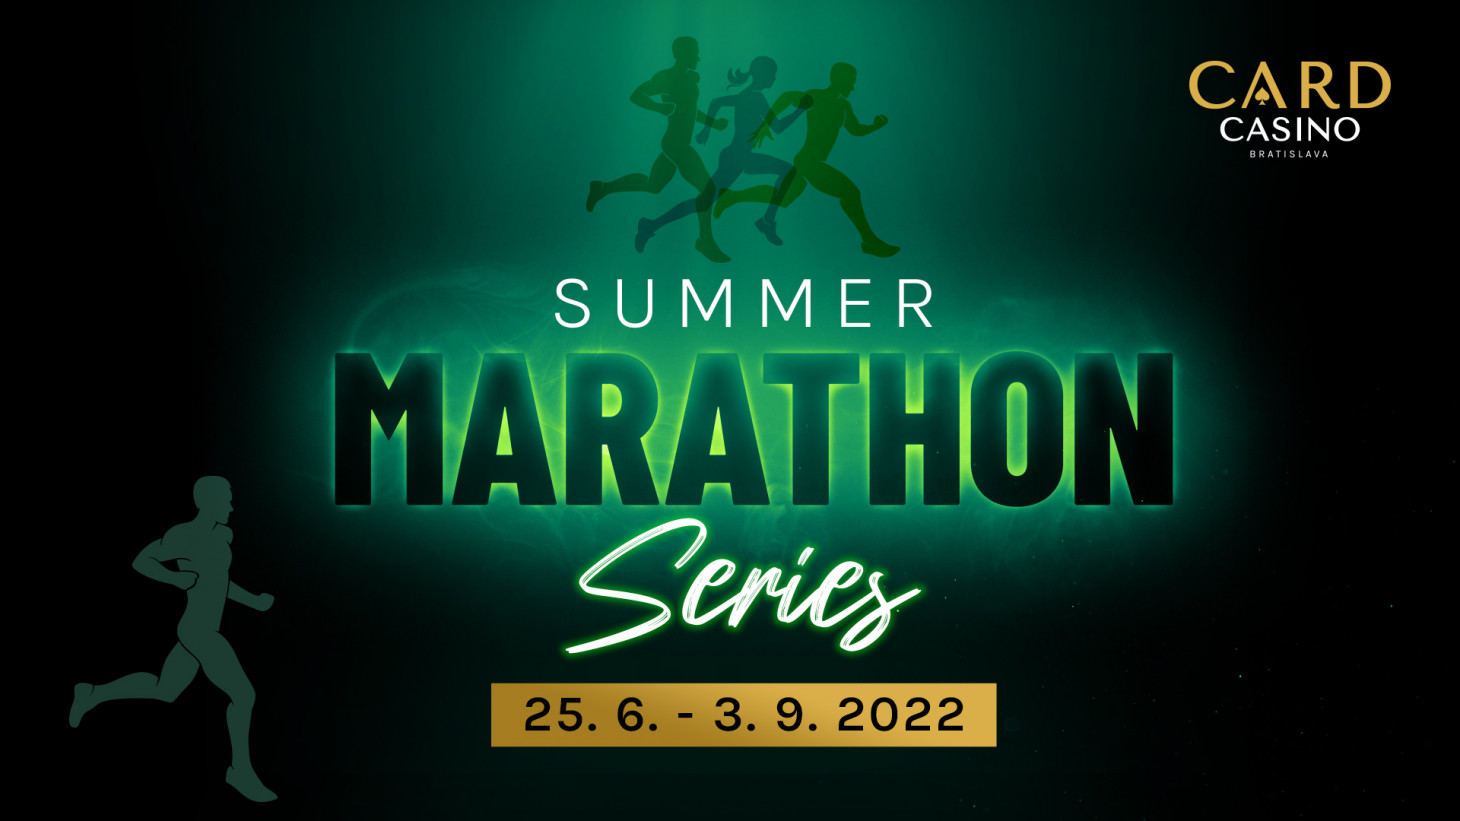 The MARATHON Summer Series brings tournaments with a total guarantee of €230,000!